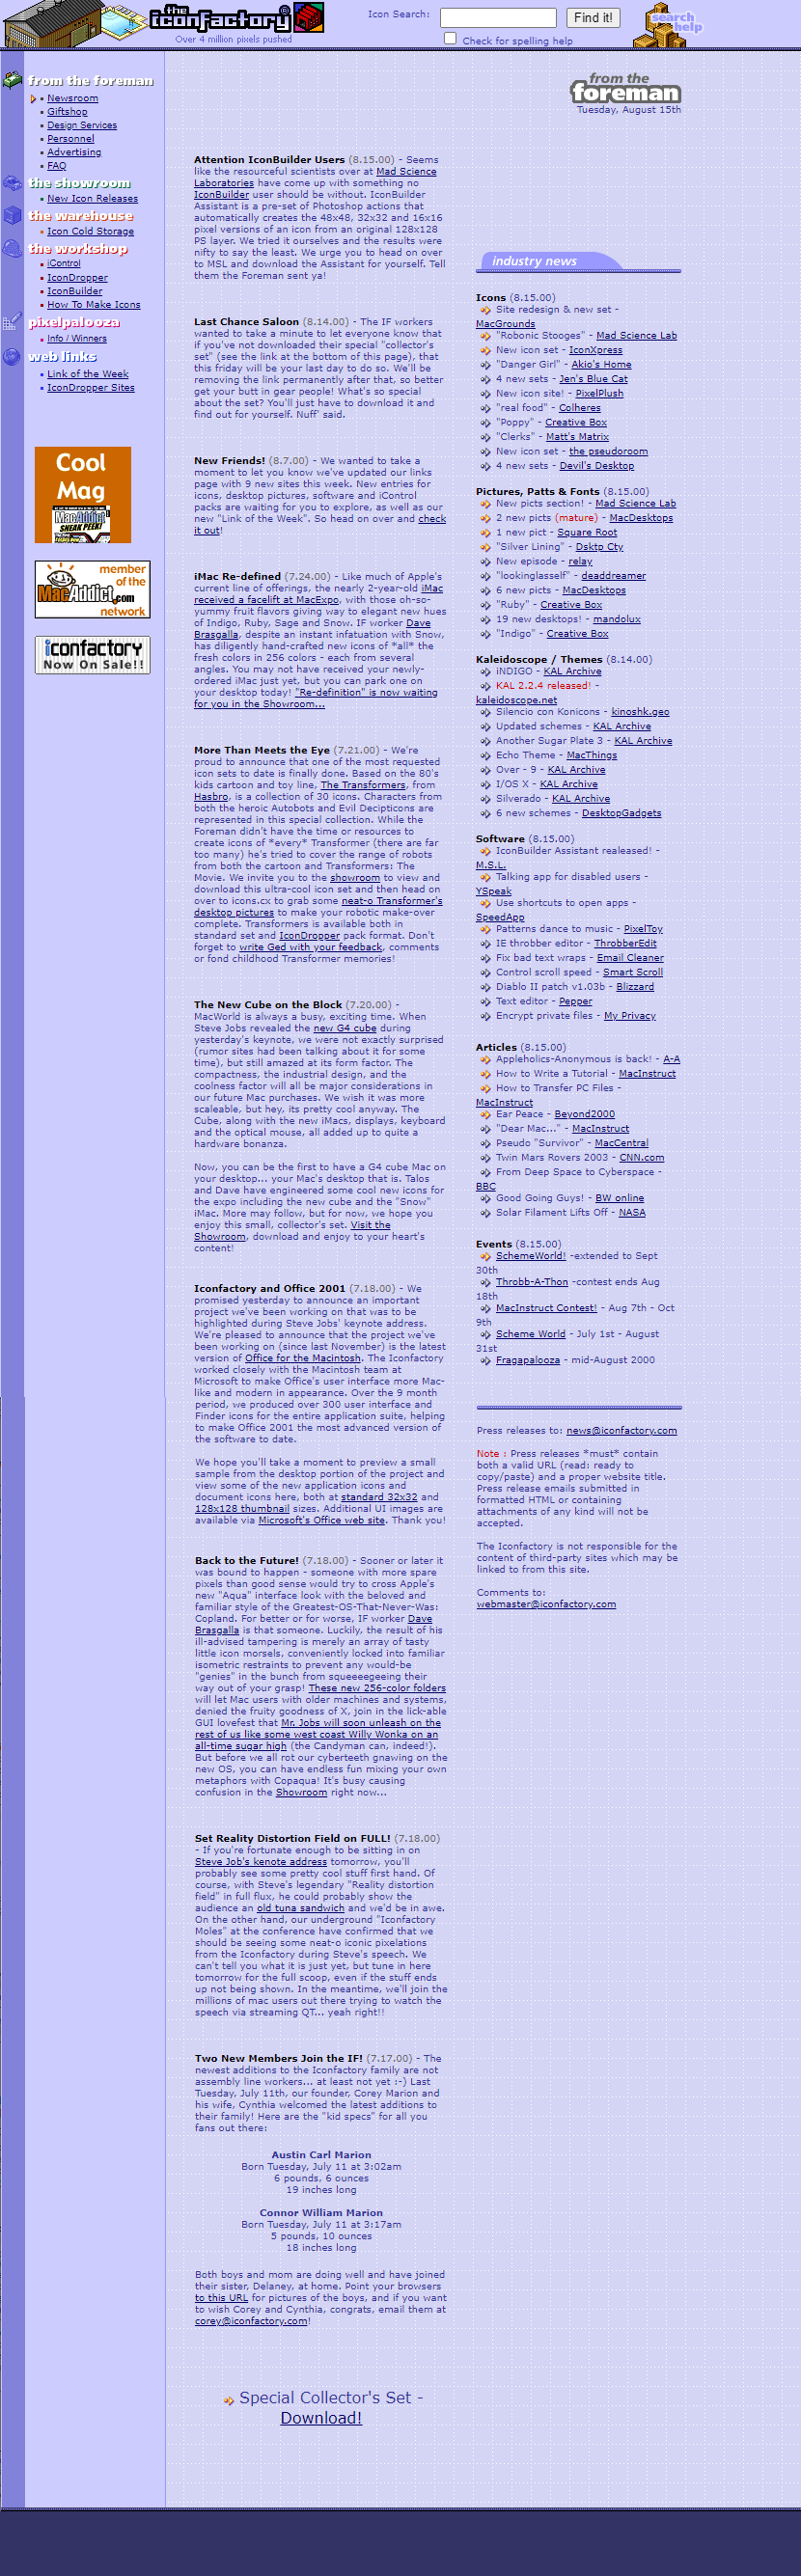 The Iconfactory website in 2000